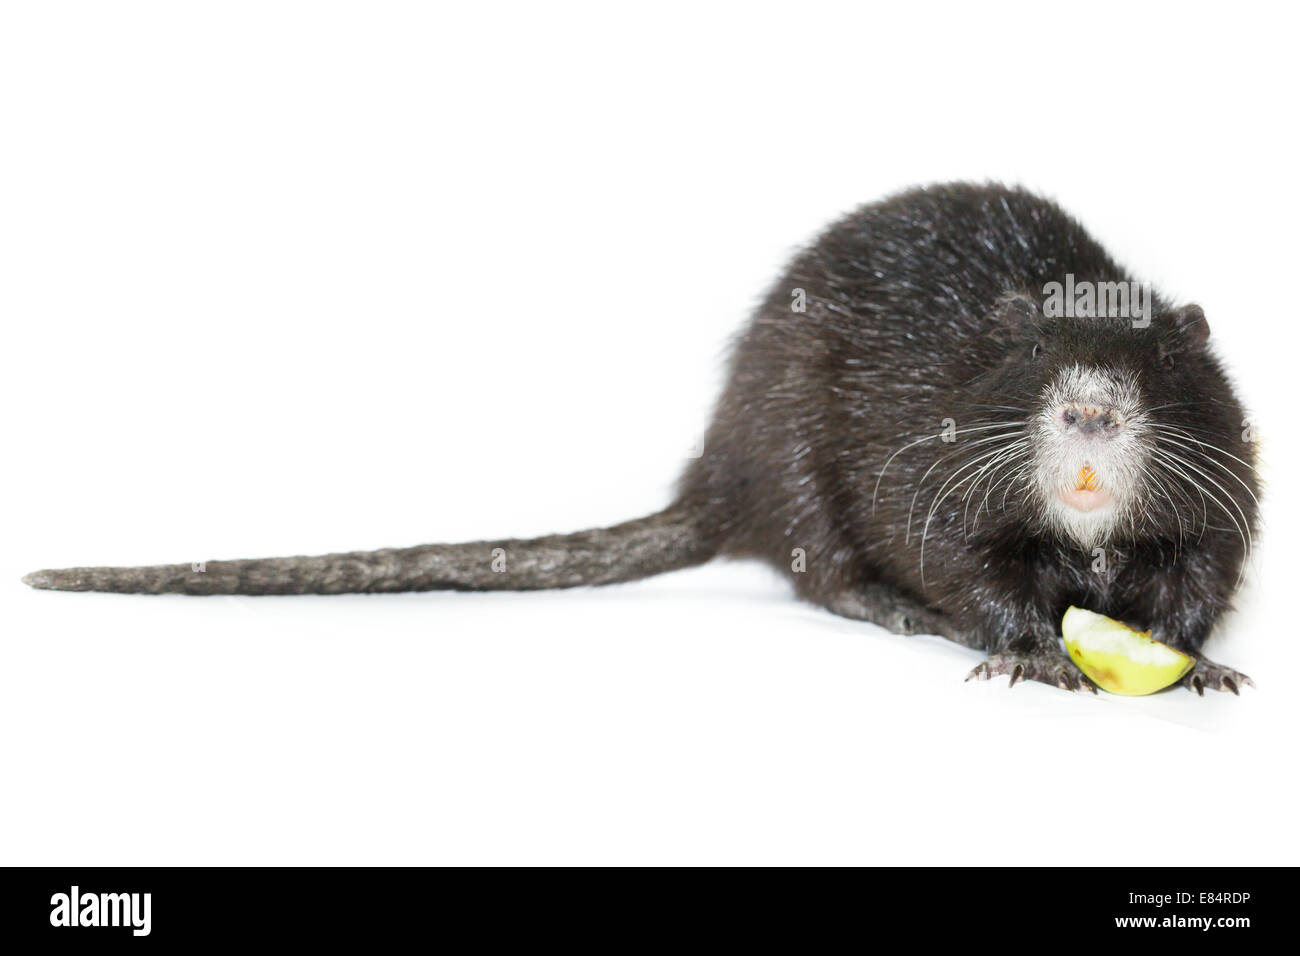 Myocastor coypus, Black Nutria breed as pets; in studio against a white background. Stock Photo